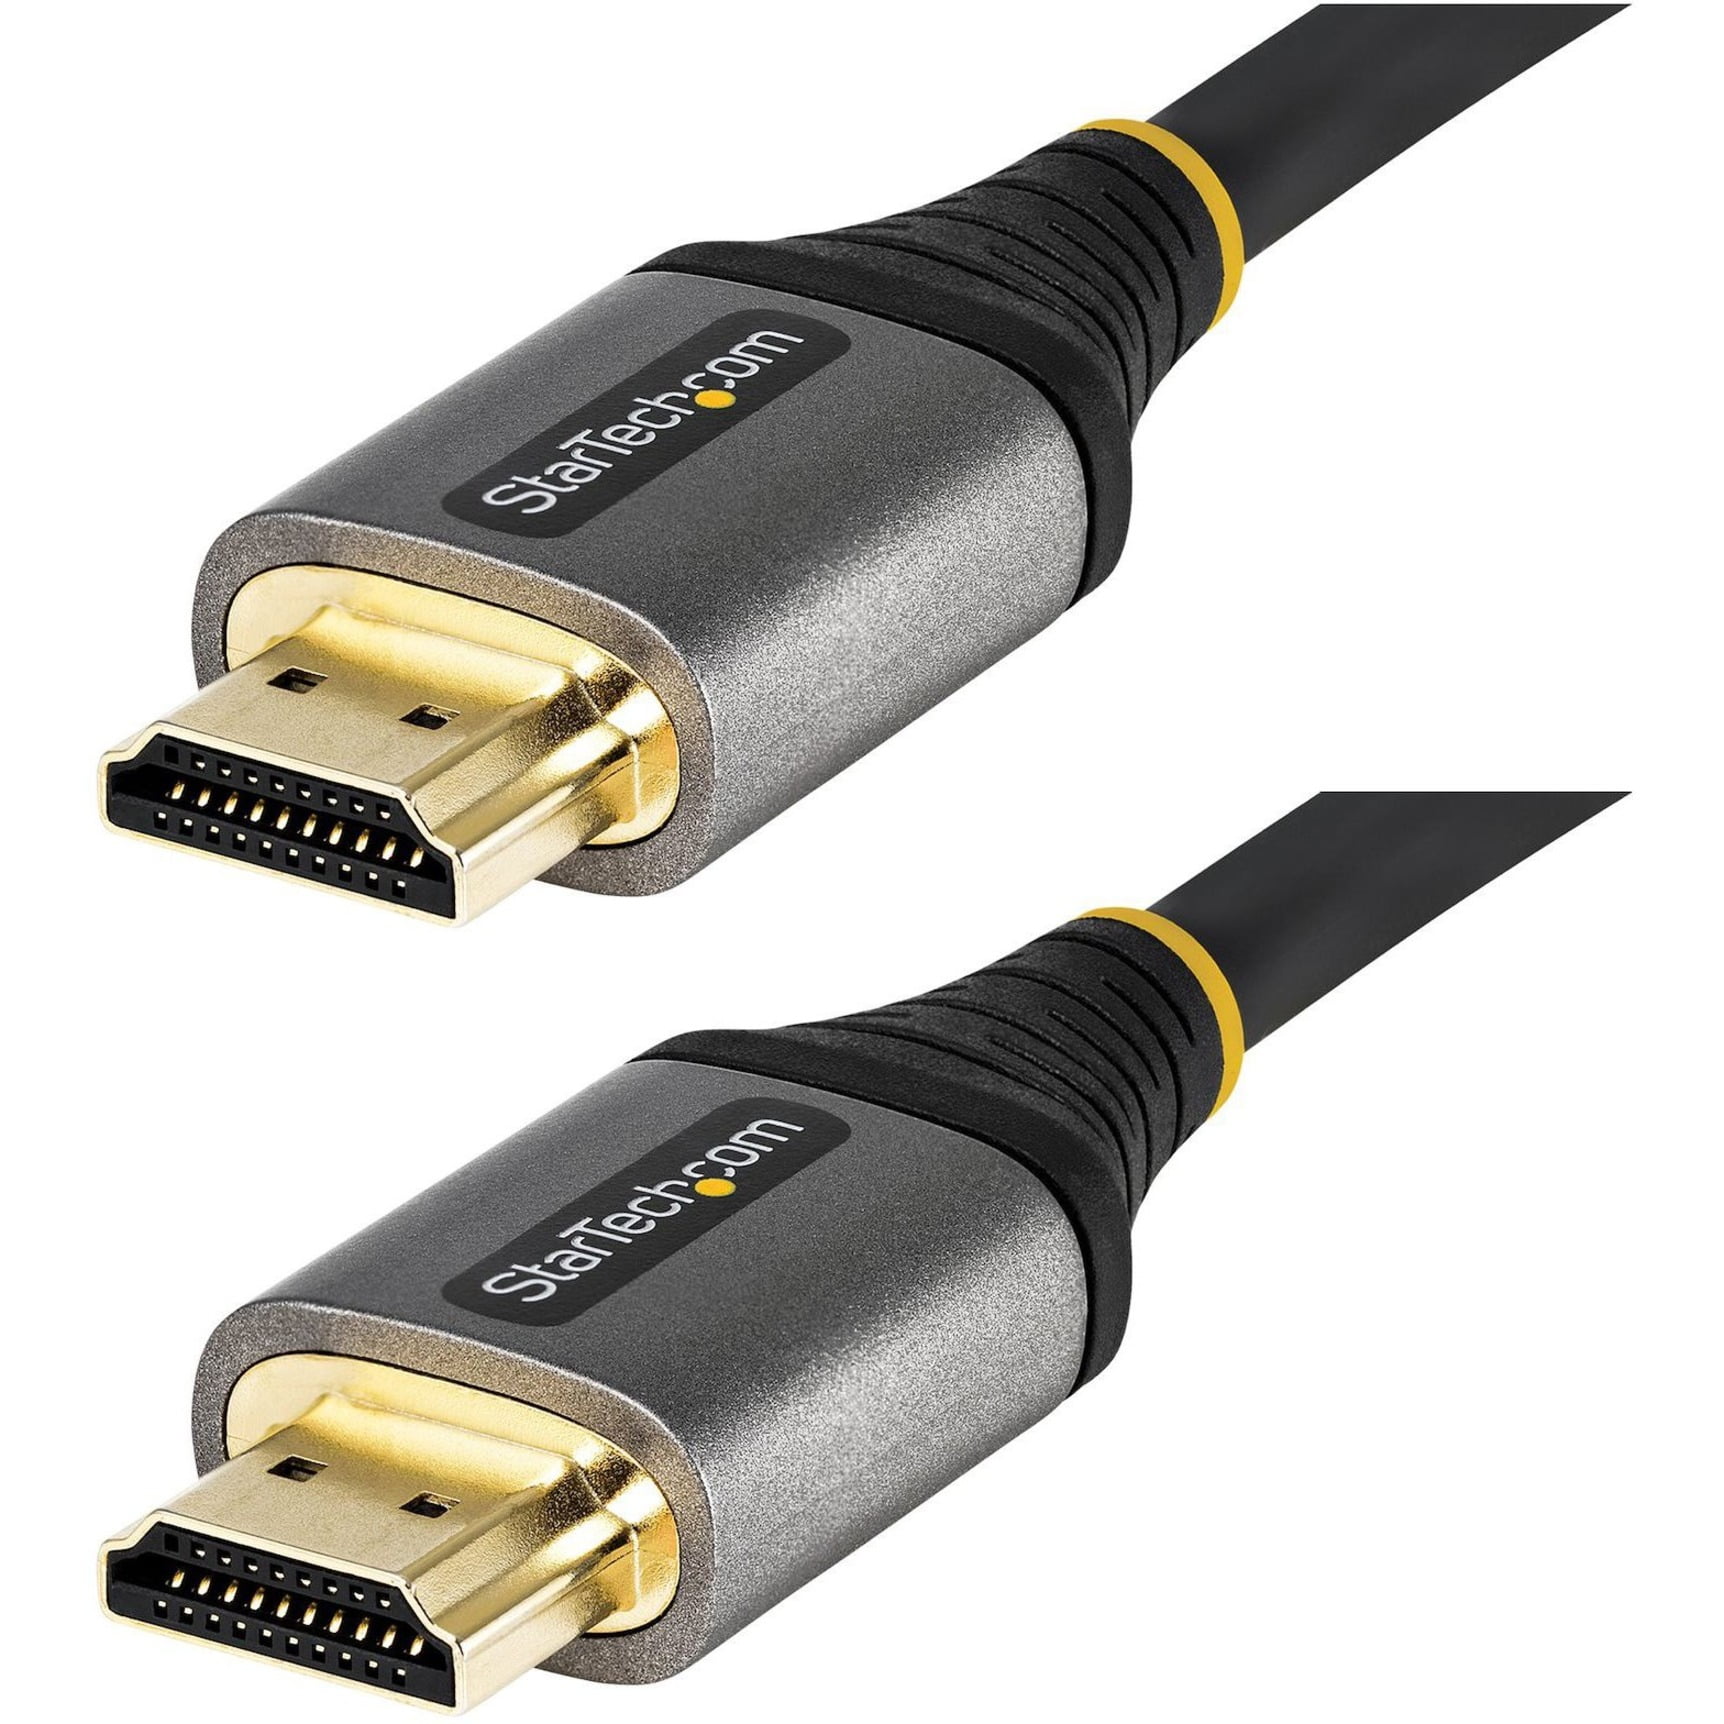 30FT, Black HDMI Cable 4K HDMI 2.0 Ready High Speed with Ethernet Support 10.2Gbps Cmple